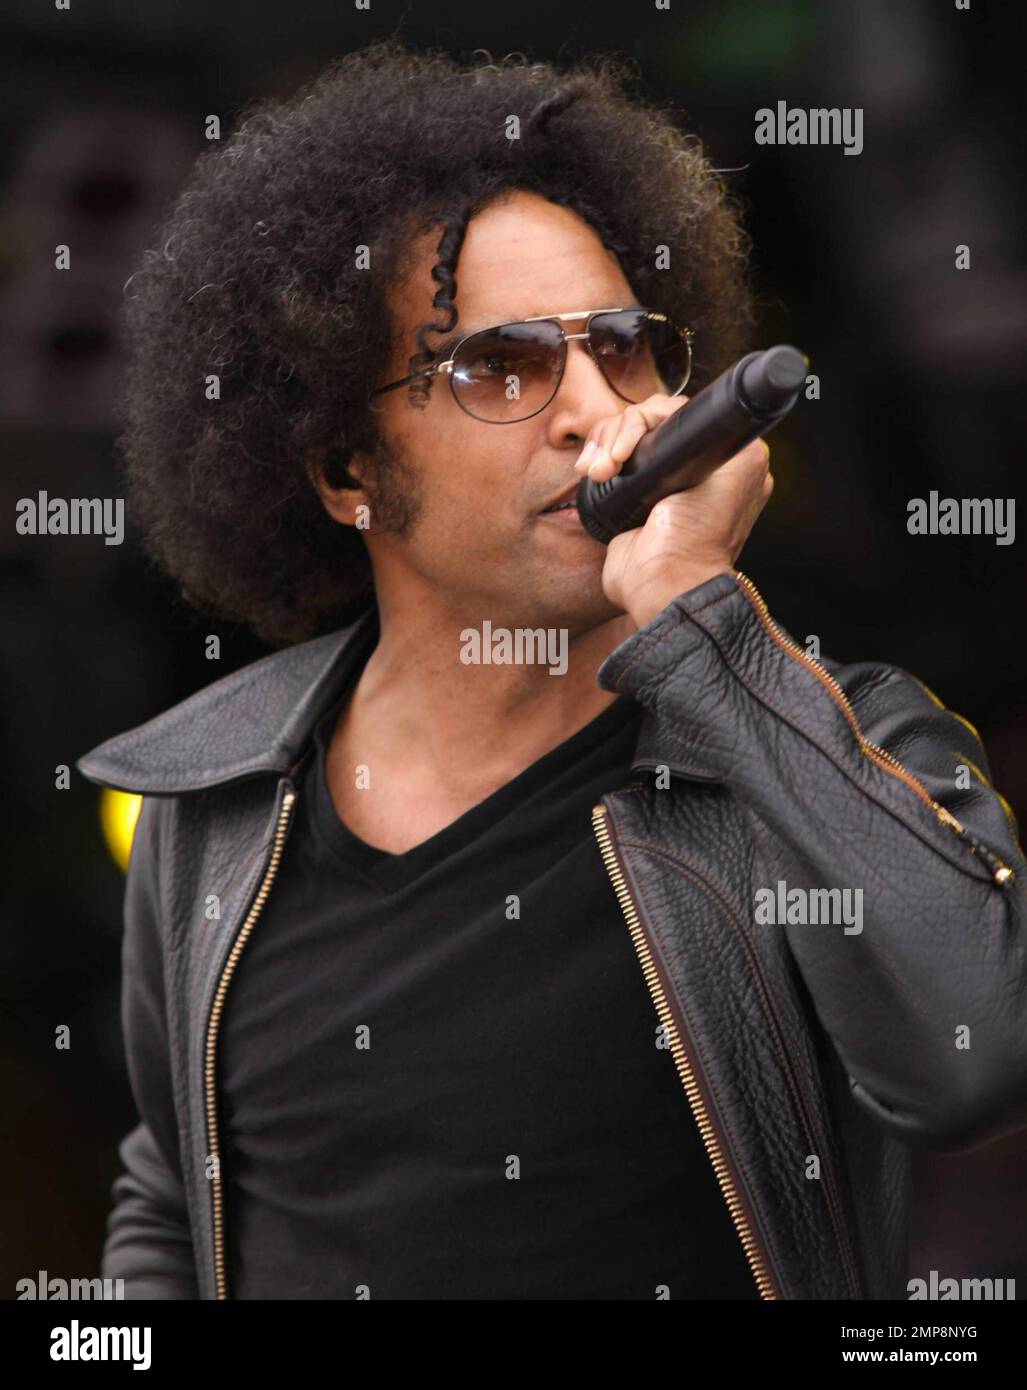 William DuVall, lead singer of Alice in Chains performs live at the  Sonisphere Festival, a rock, metal, electro and punk traveling music event  held at Knebworth House and Park. Knebworth, UK. 08/01/10